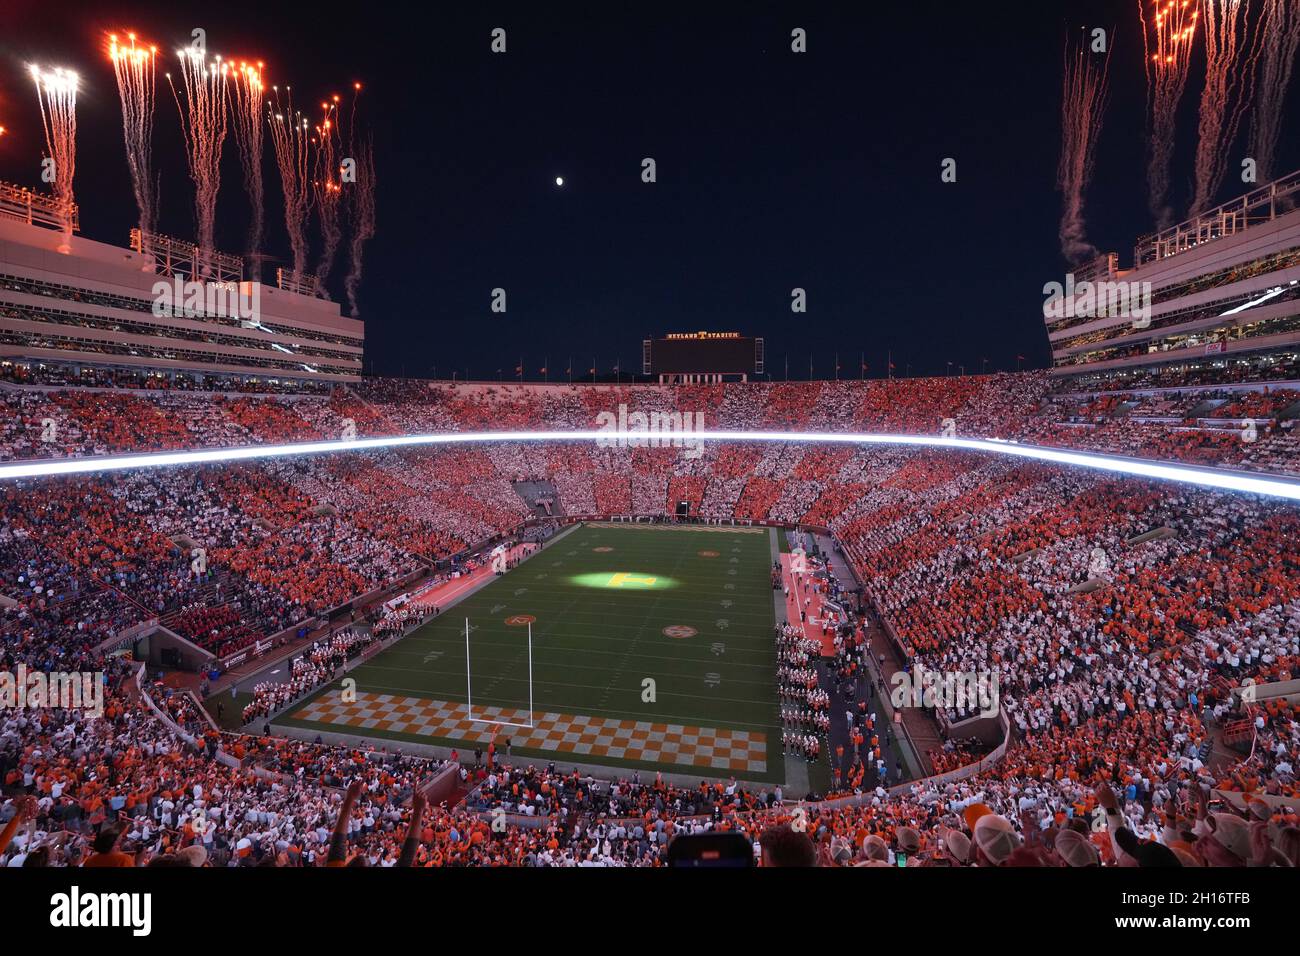 Neyland Stadium capacity will be 101915 for Tennessee football in 2022